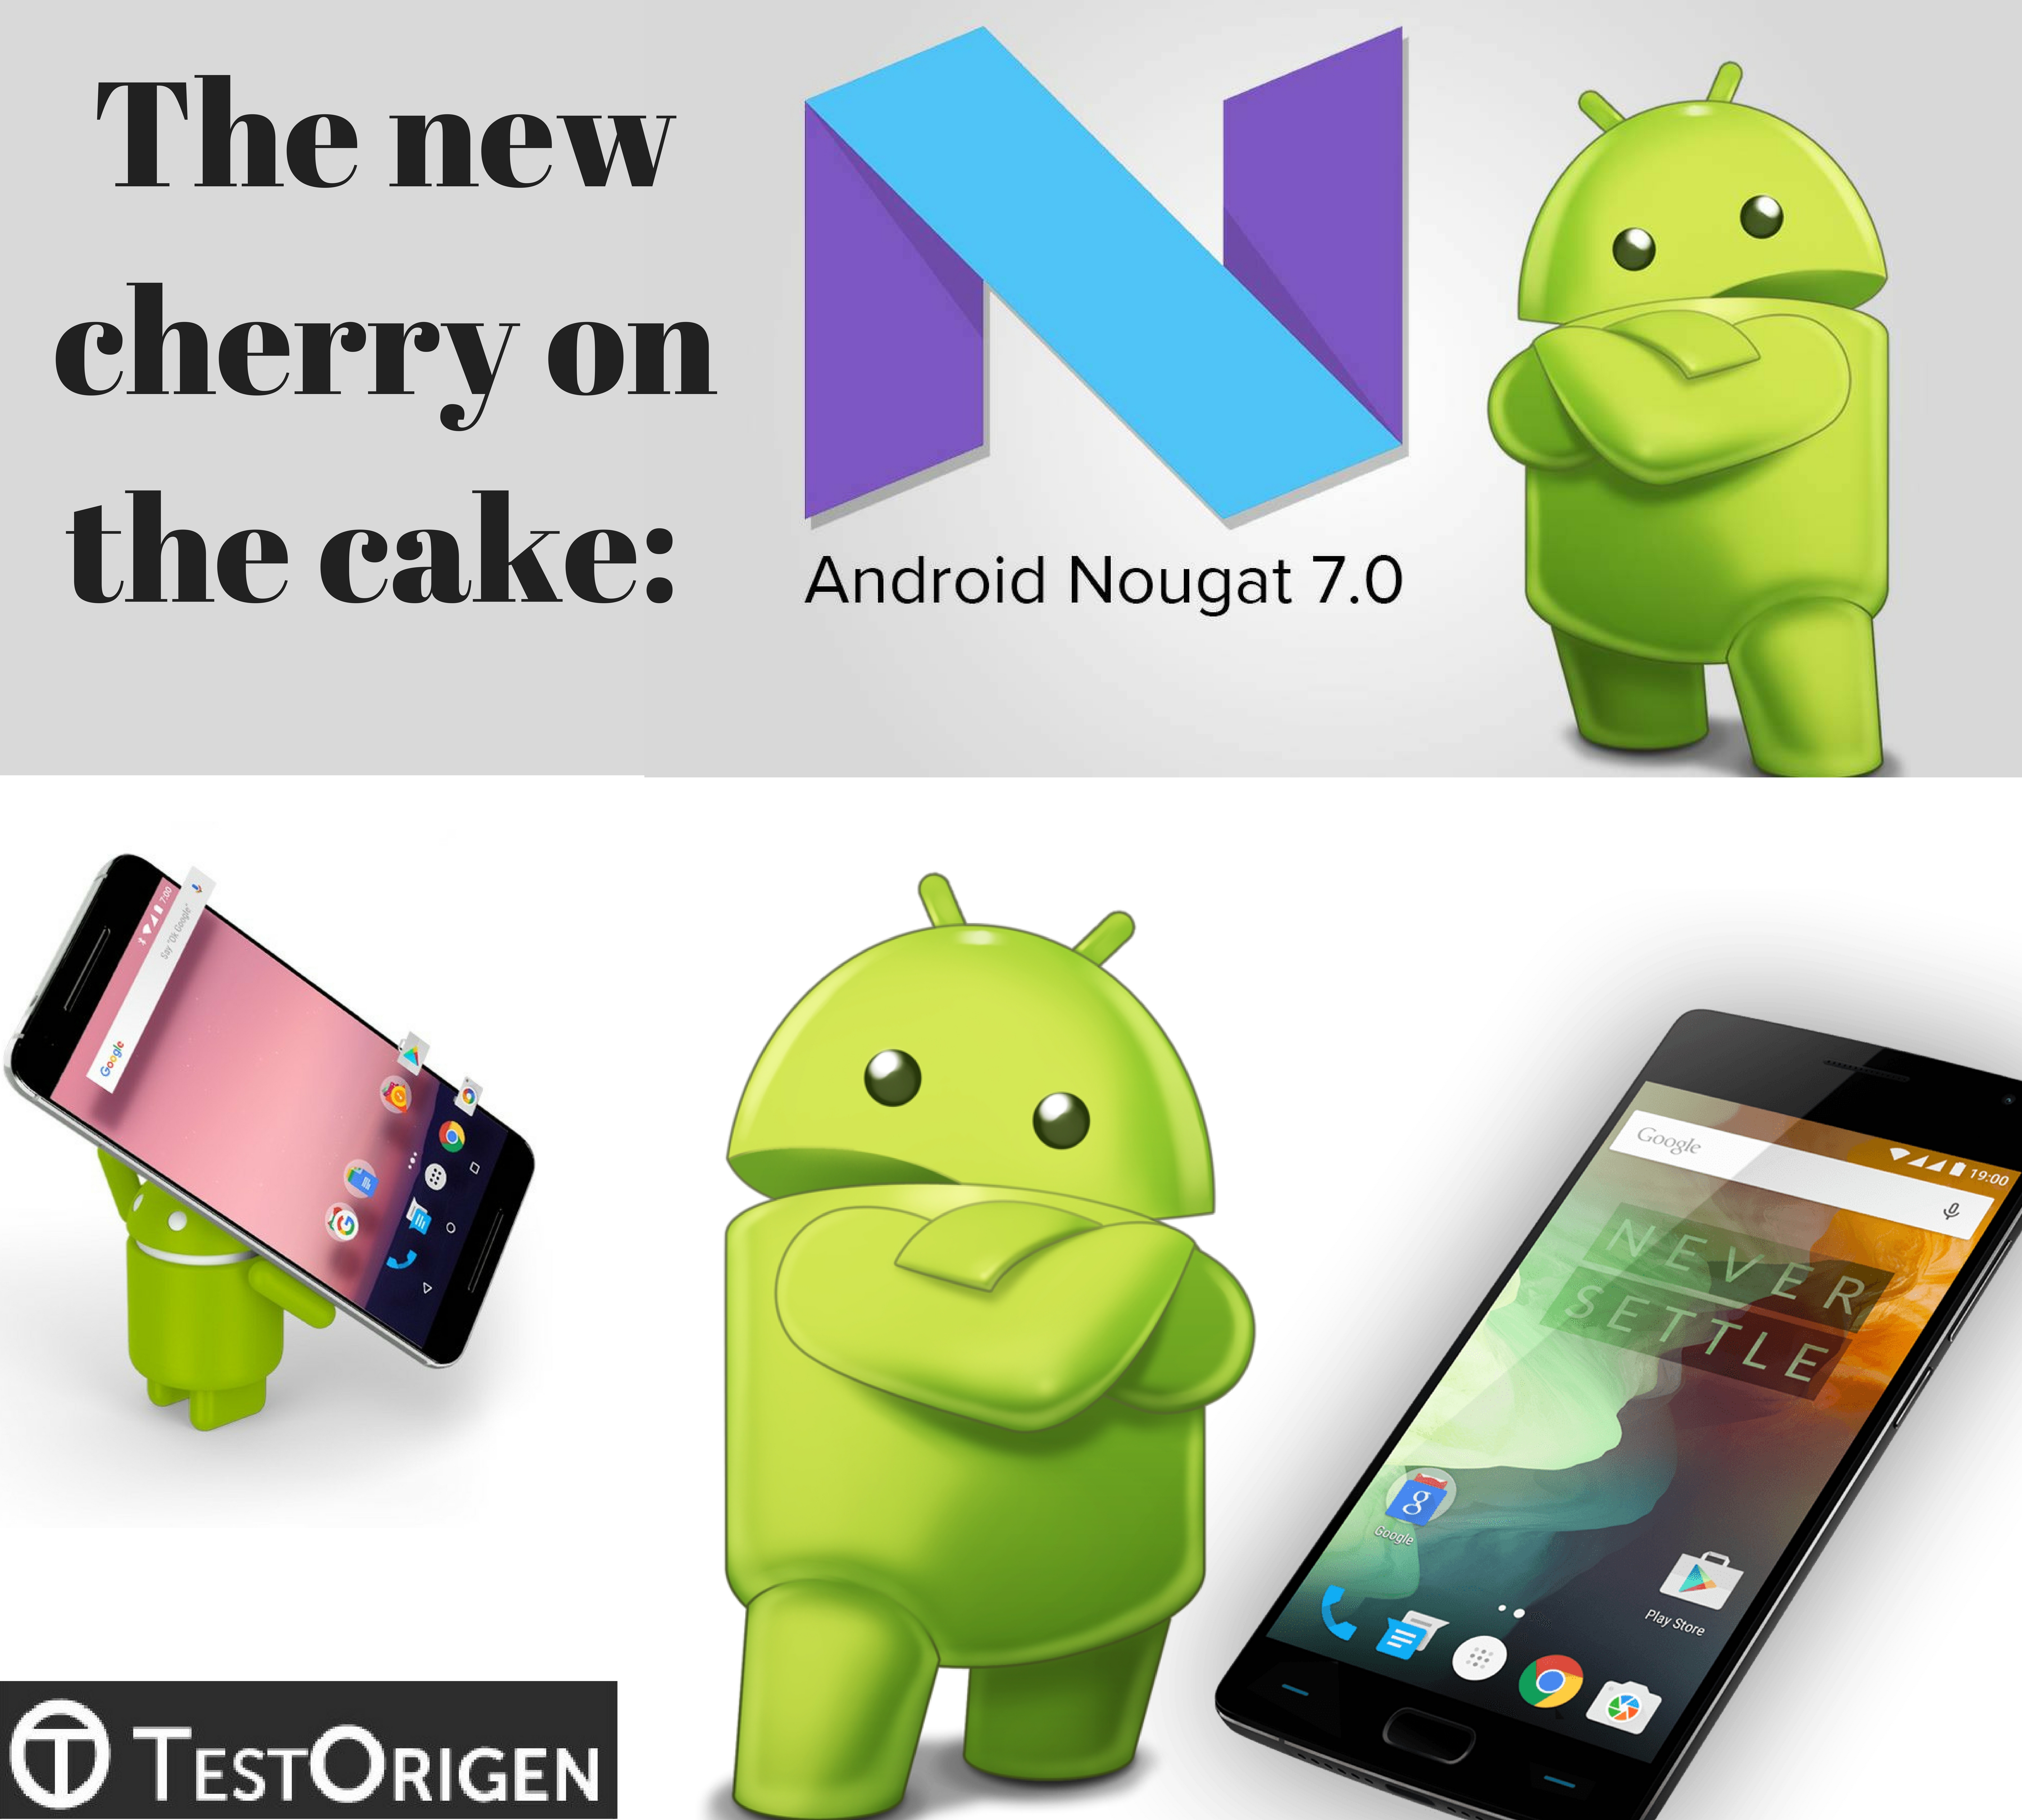 The new cherry on the cake: Android 7.0 Nougat